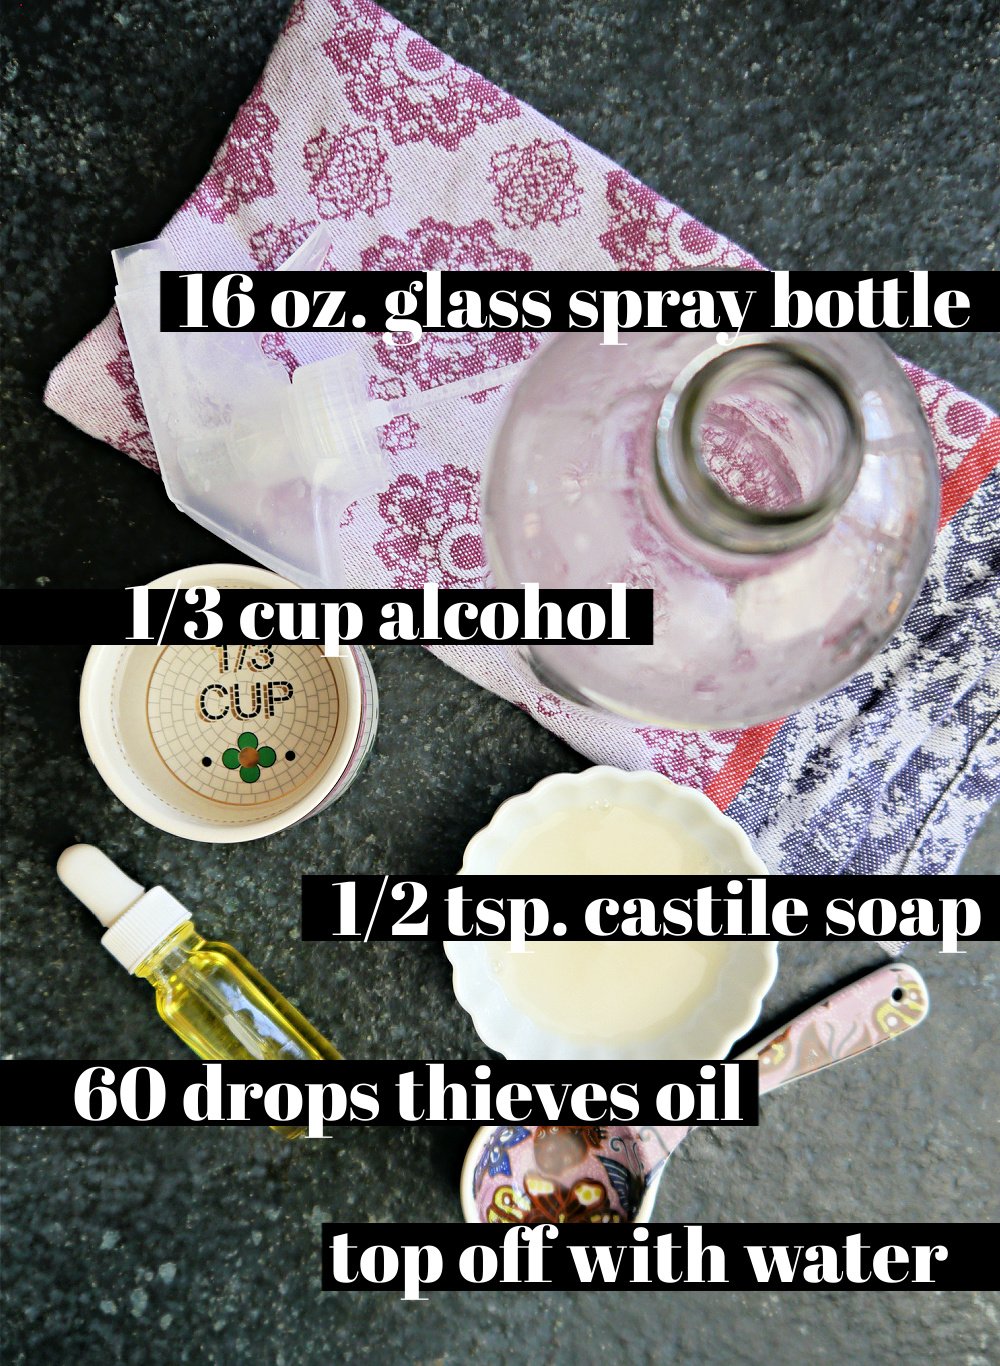 Picture of what you'll need-1/3 cup alcohol, 1/2 tsp. Castile soap, 60 drops thieve oil and 16 oz. glass spray bottle.